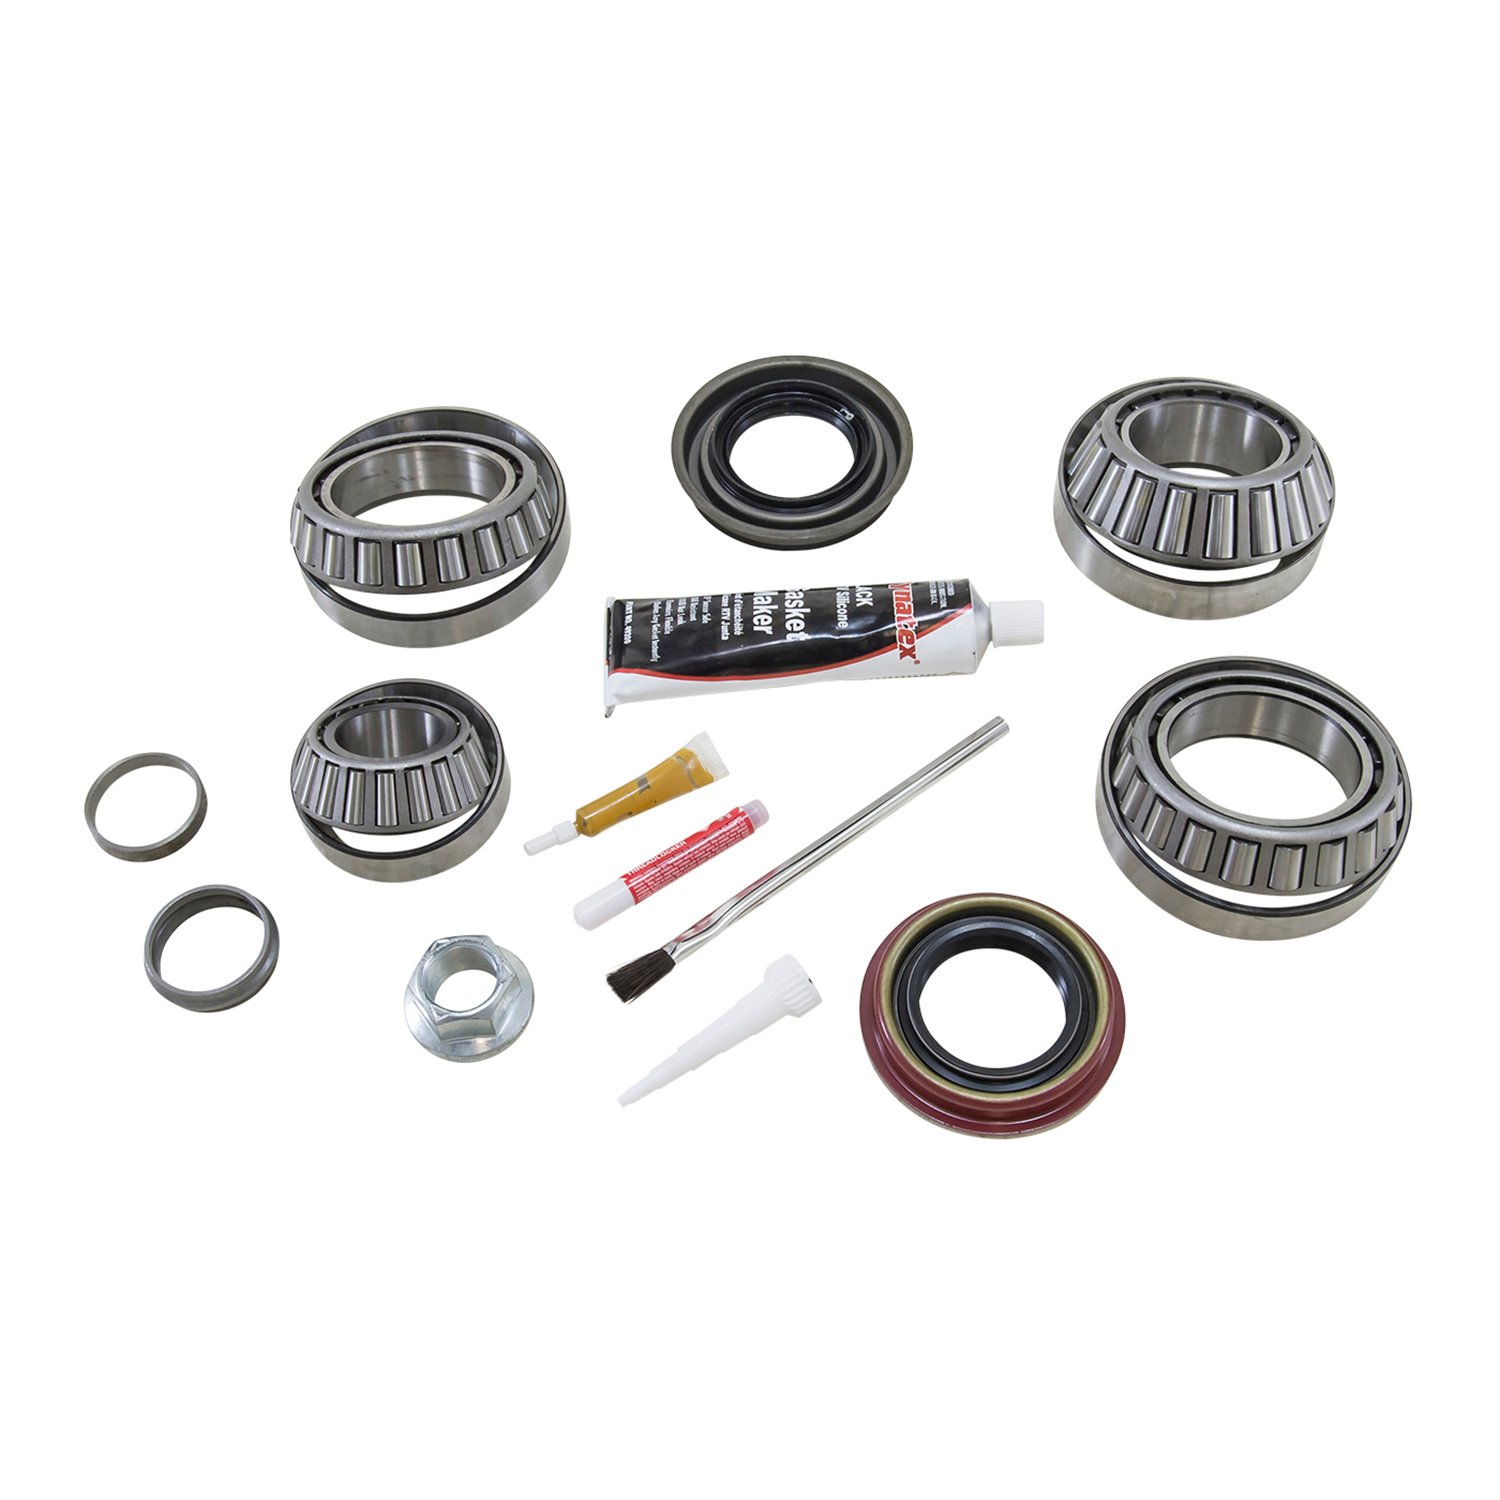 Bearing Install Kit For '11 & Up Ford 9.75 in. Differential.